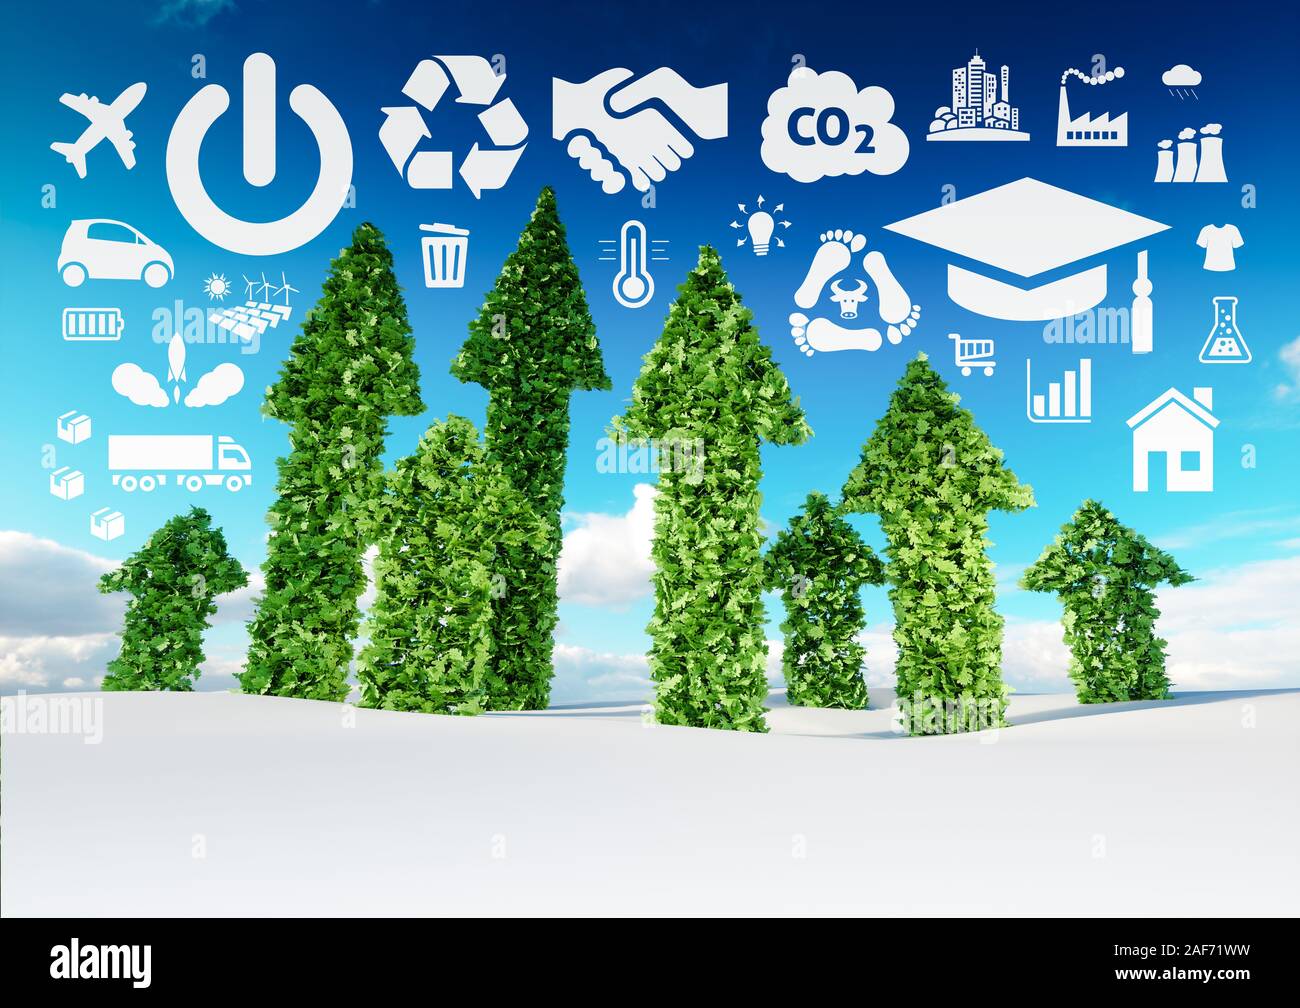 Sustainable development conceptual image. 3d illustration of fresh green leaf arrows growing from snow fieldand pointing toward ecology related icons. Stock Photo